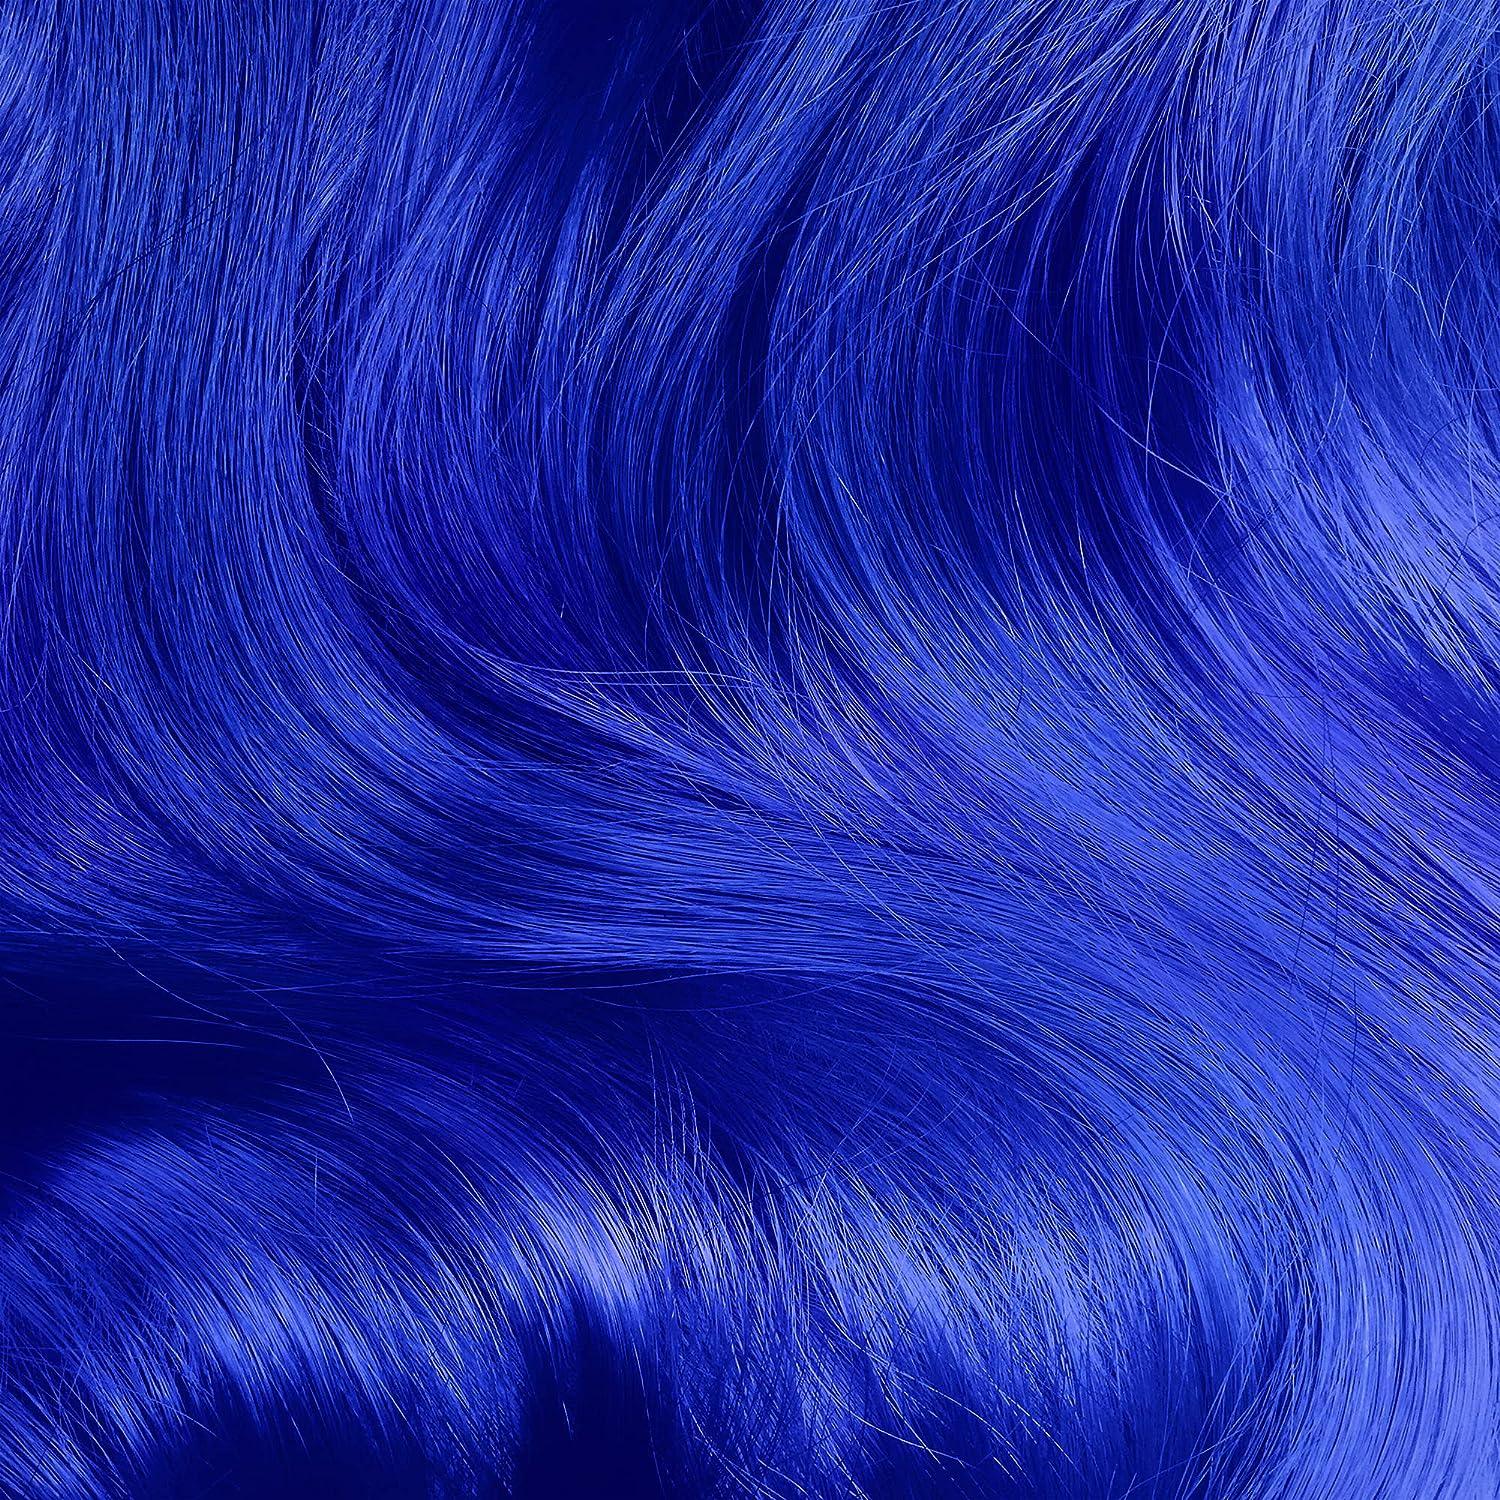 Lime Crime Unicorn Hair Dye Full Coverage Mystic (Electric Blue) - Vegan  and Cruelty Free Semi-Permanent Hair Color Conditions & Moisturizes -  Temporary Blue Hair Dye With Sugary Citrus Vanilla Scent